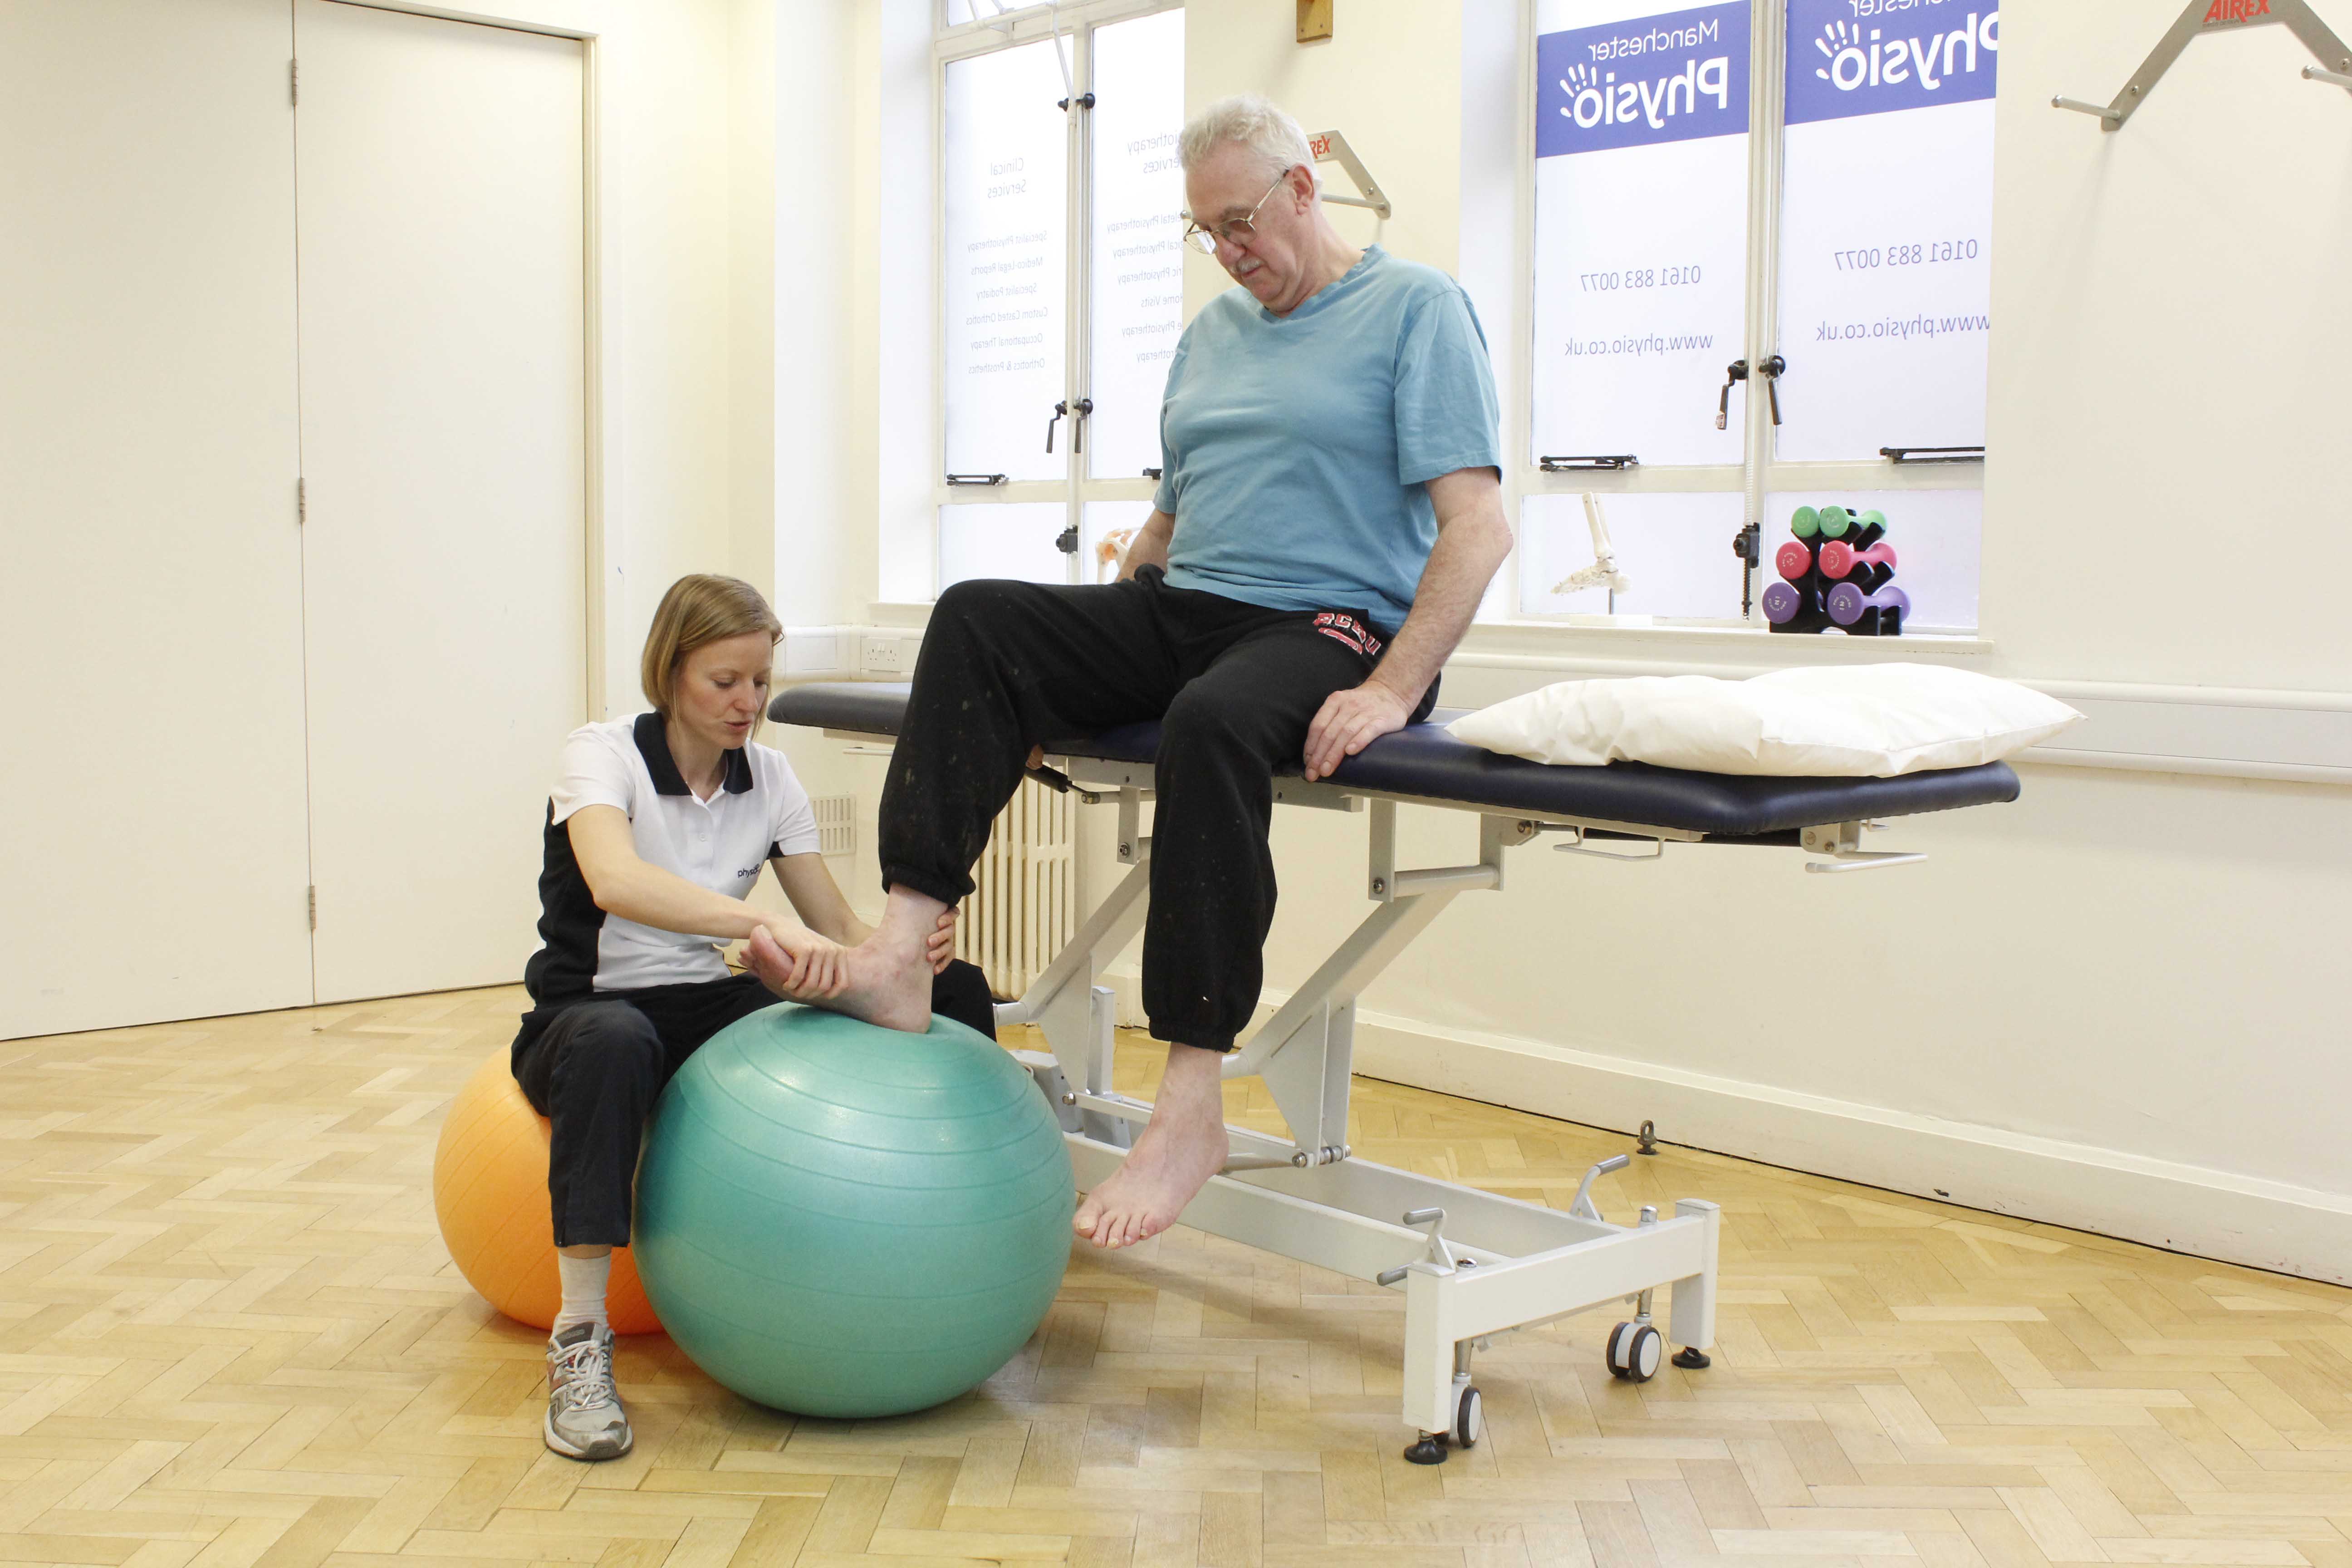 Experienced physiotherapist assisting with some ankle dorsiflexion exercises